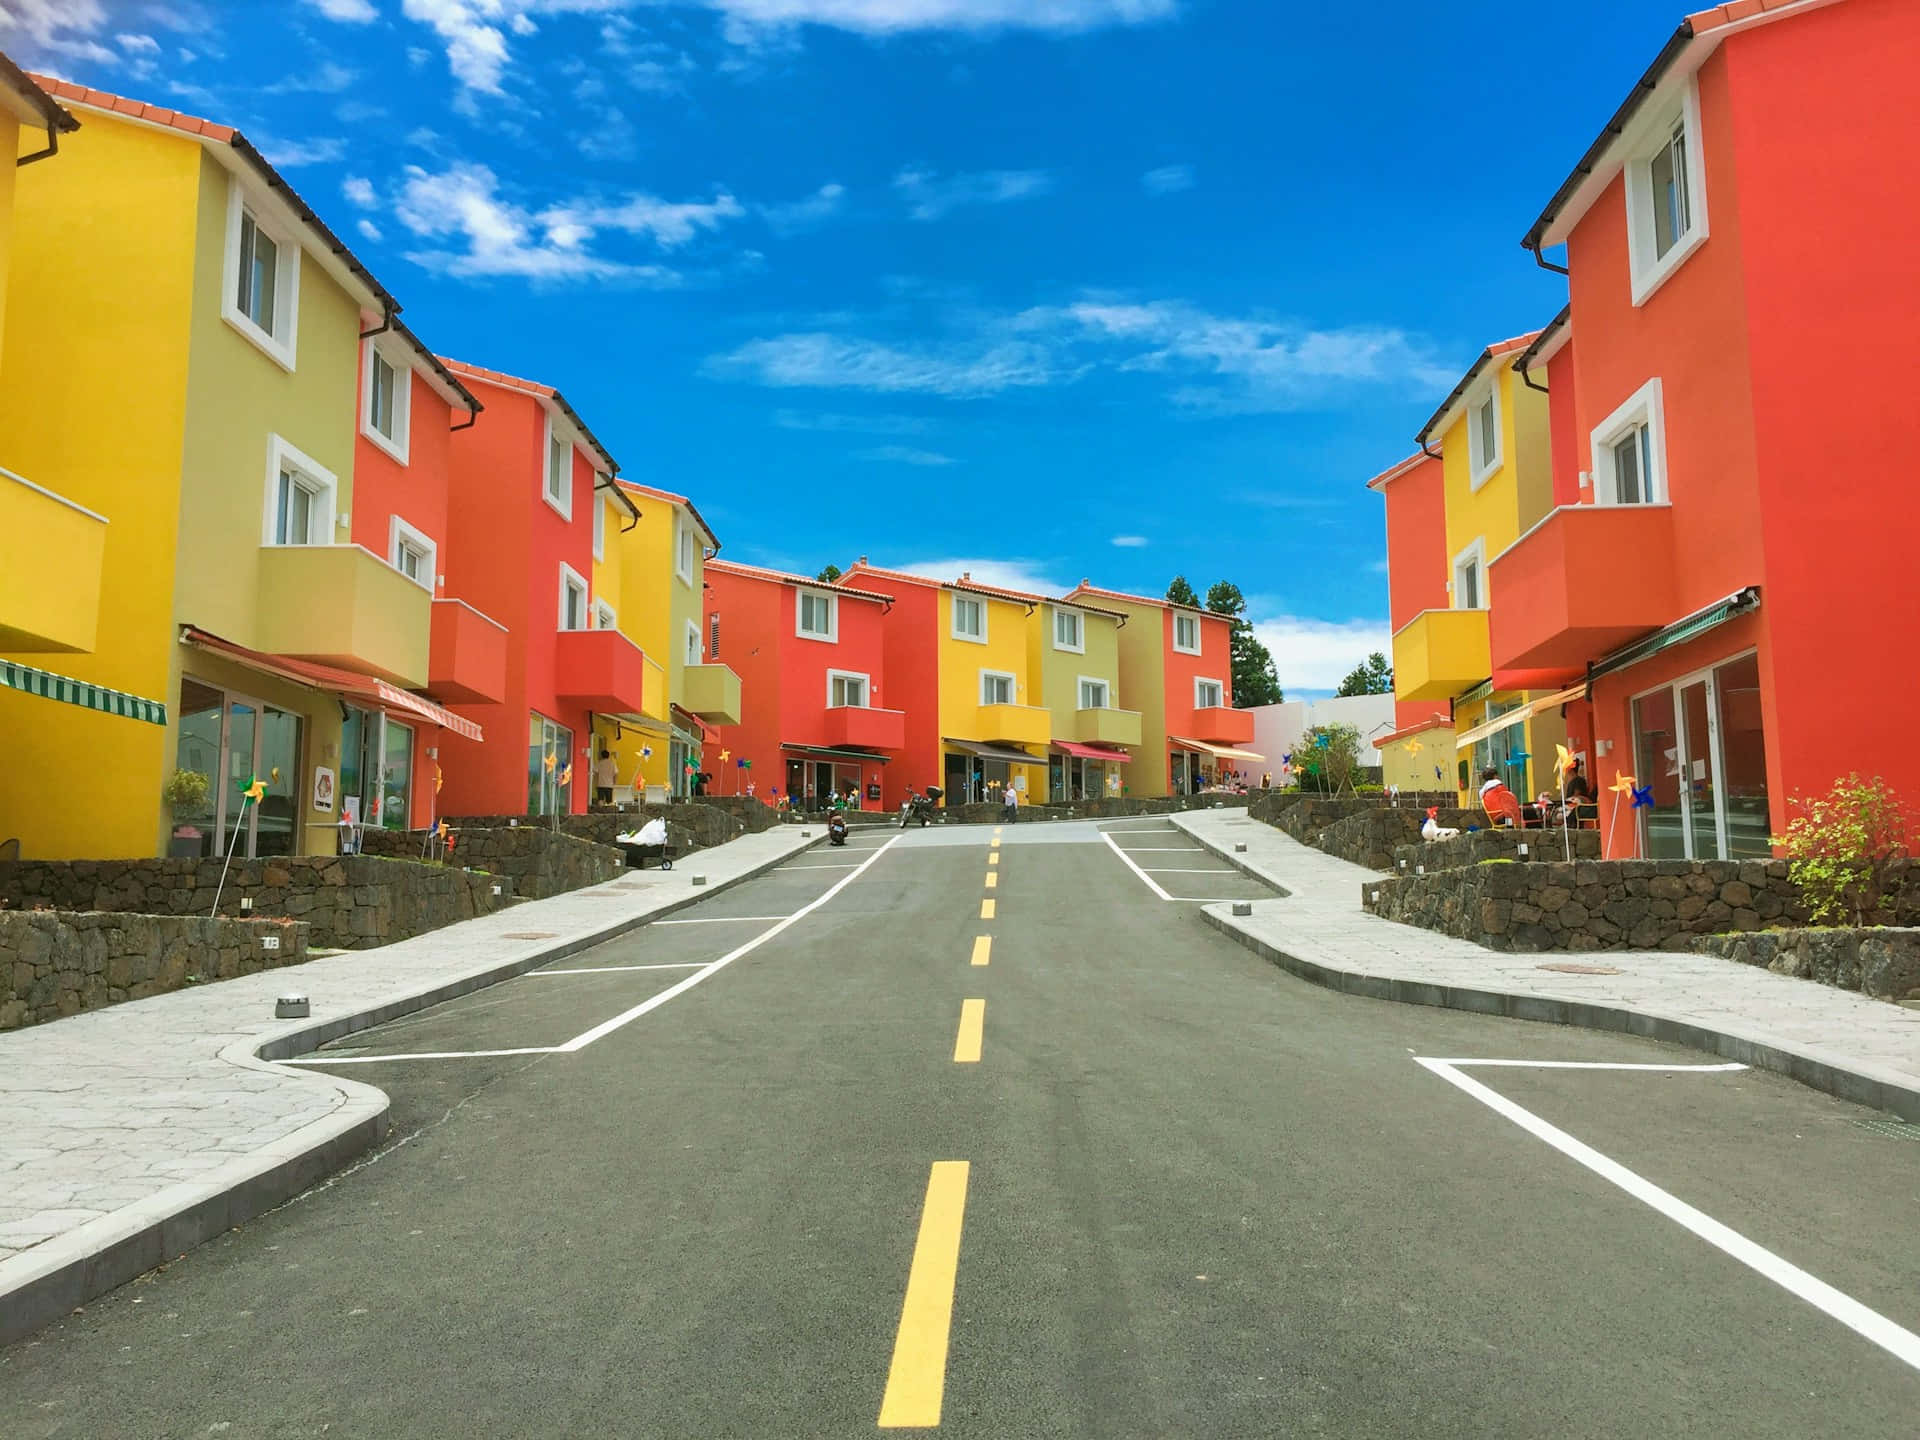 Colorful Townhouses Street View Wallpaper